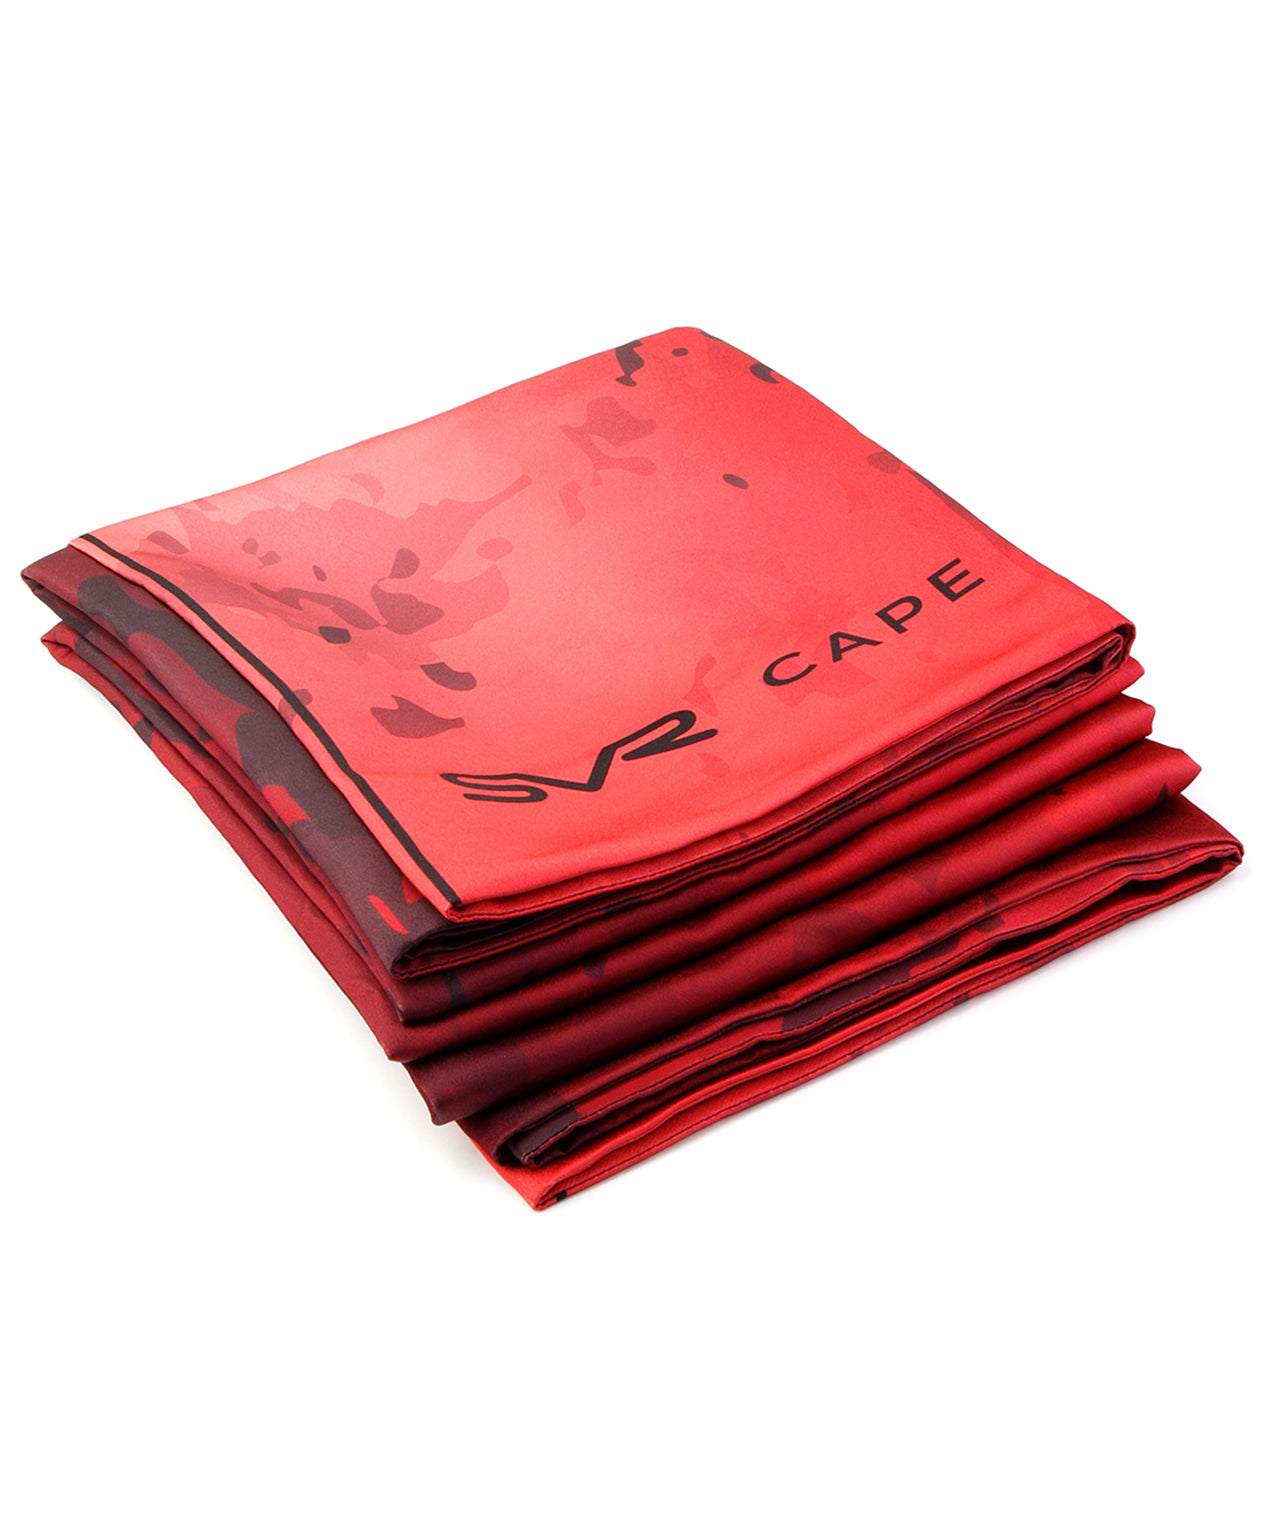 SVR Cape Ping Pong Table Cover